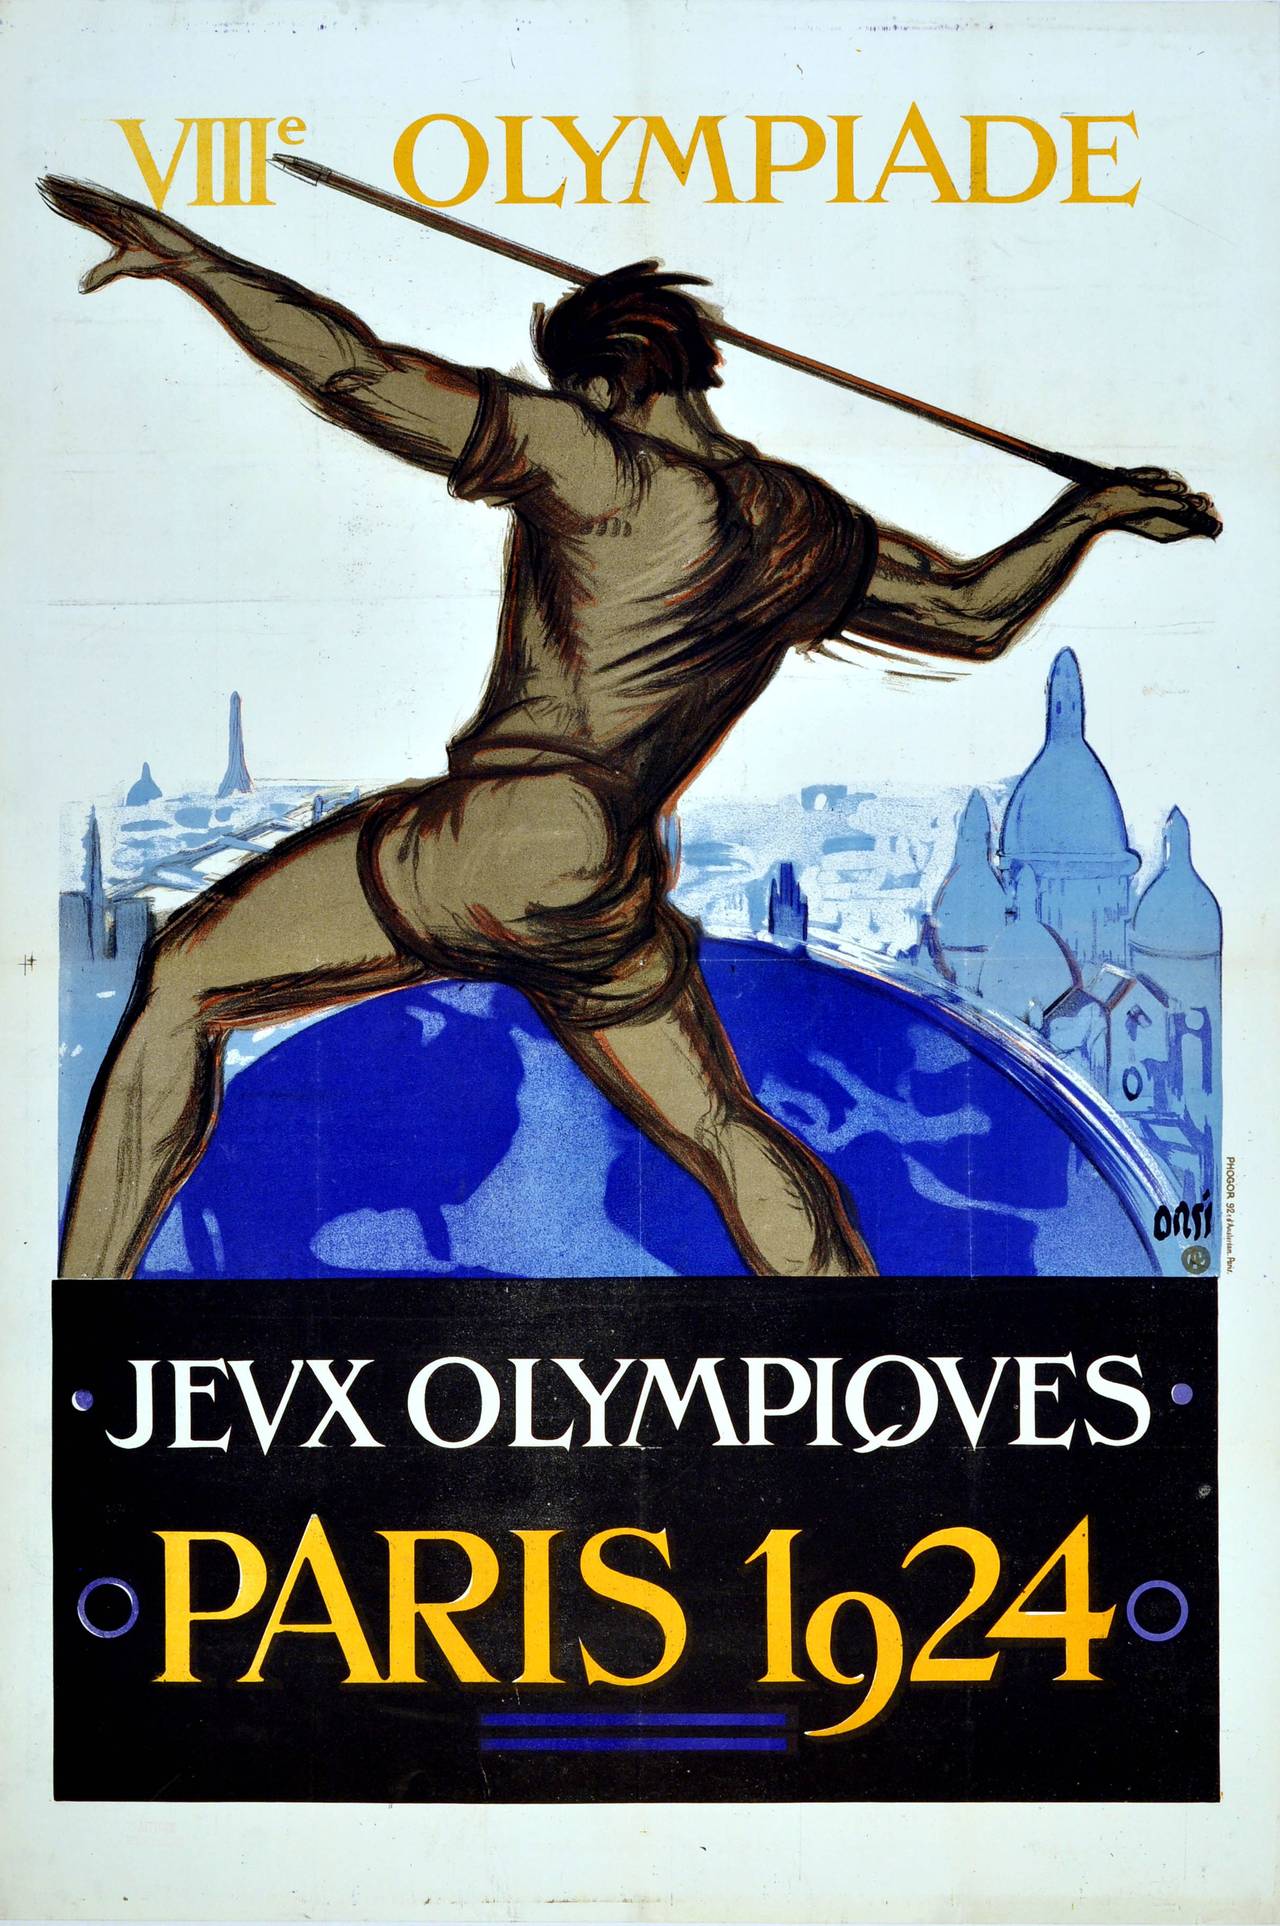 Orsi Print - Original Vintage Summer Olympic Games Poster for the VIII Olympiad, Paris 1924